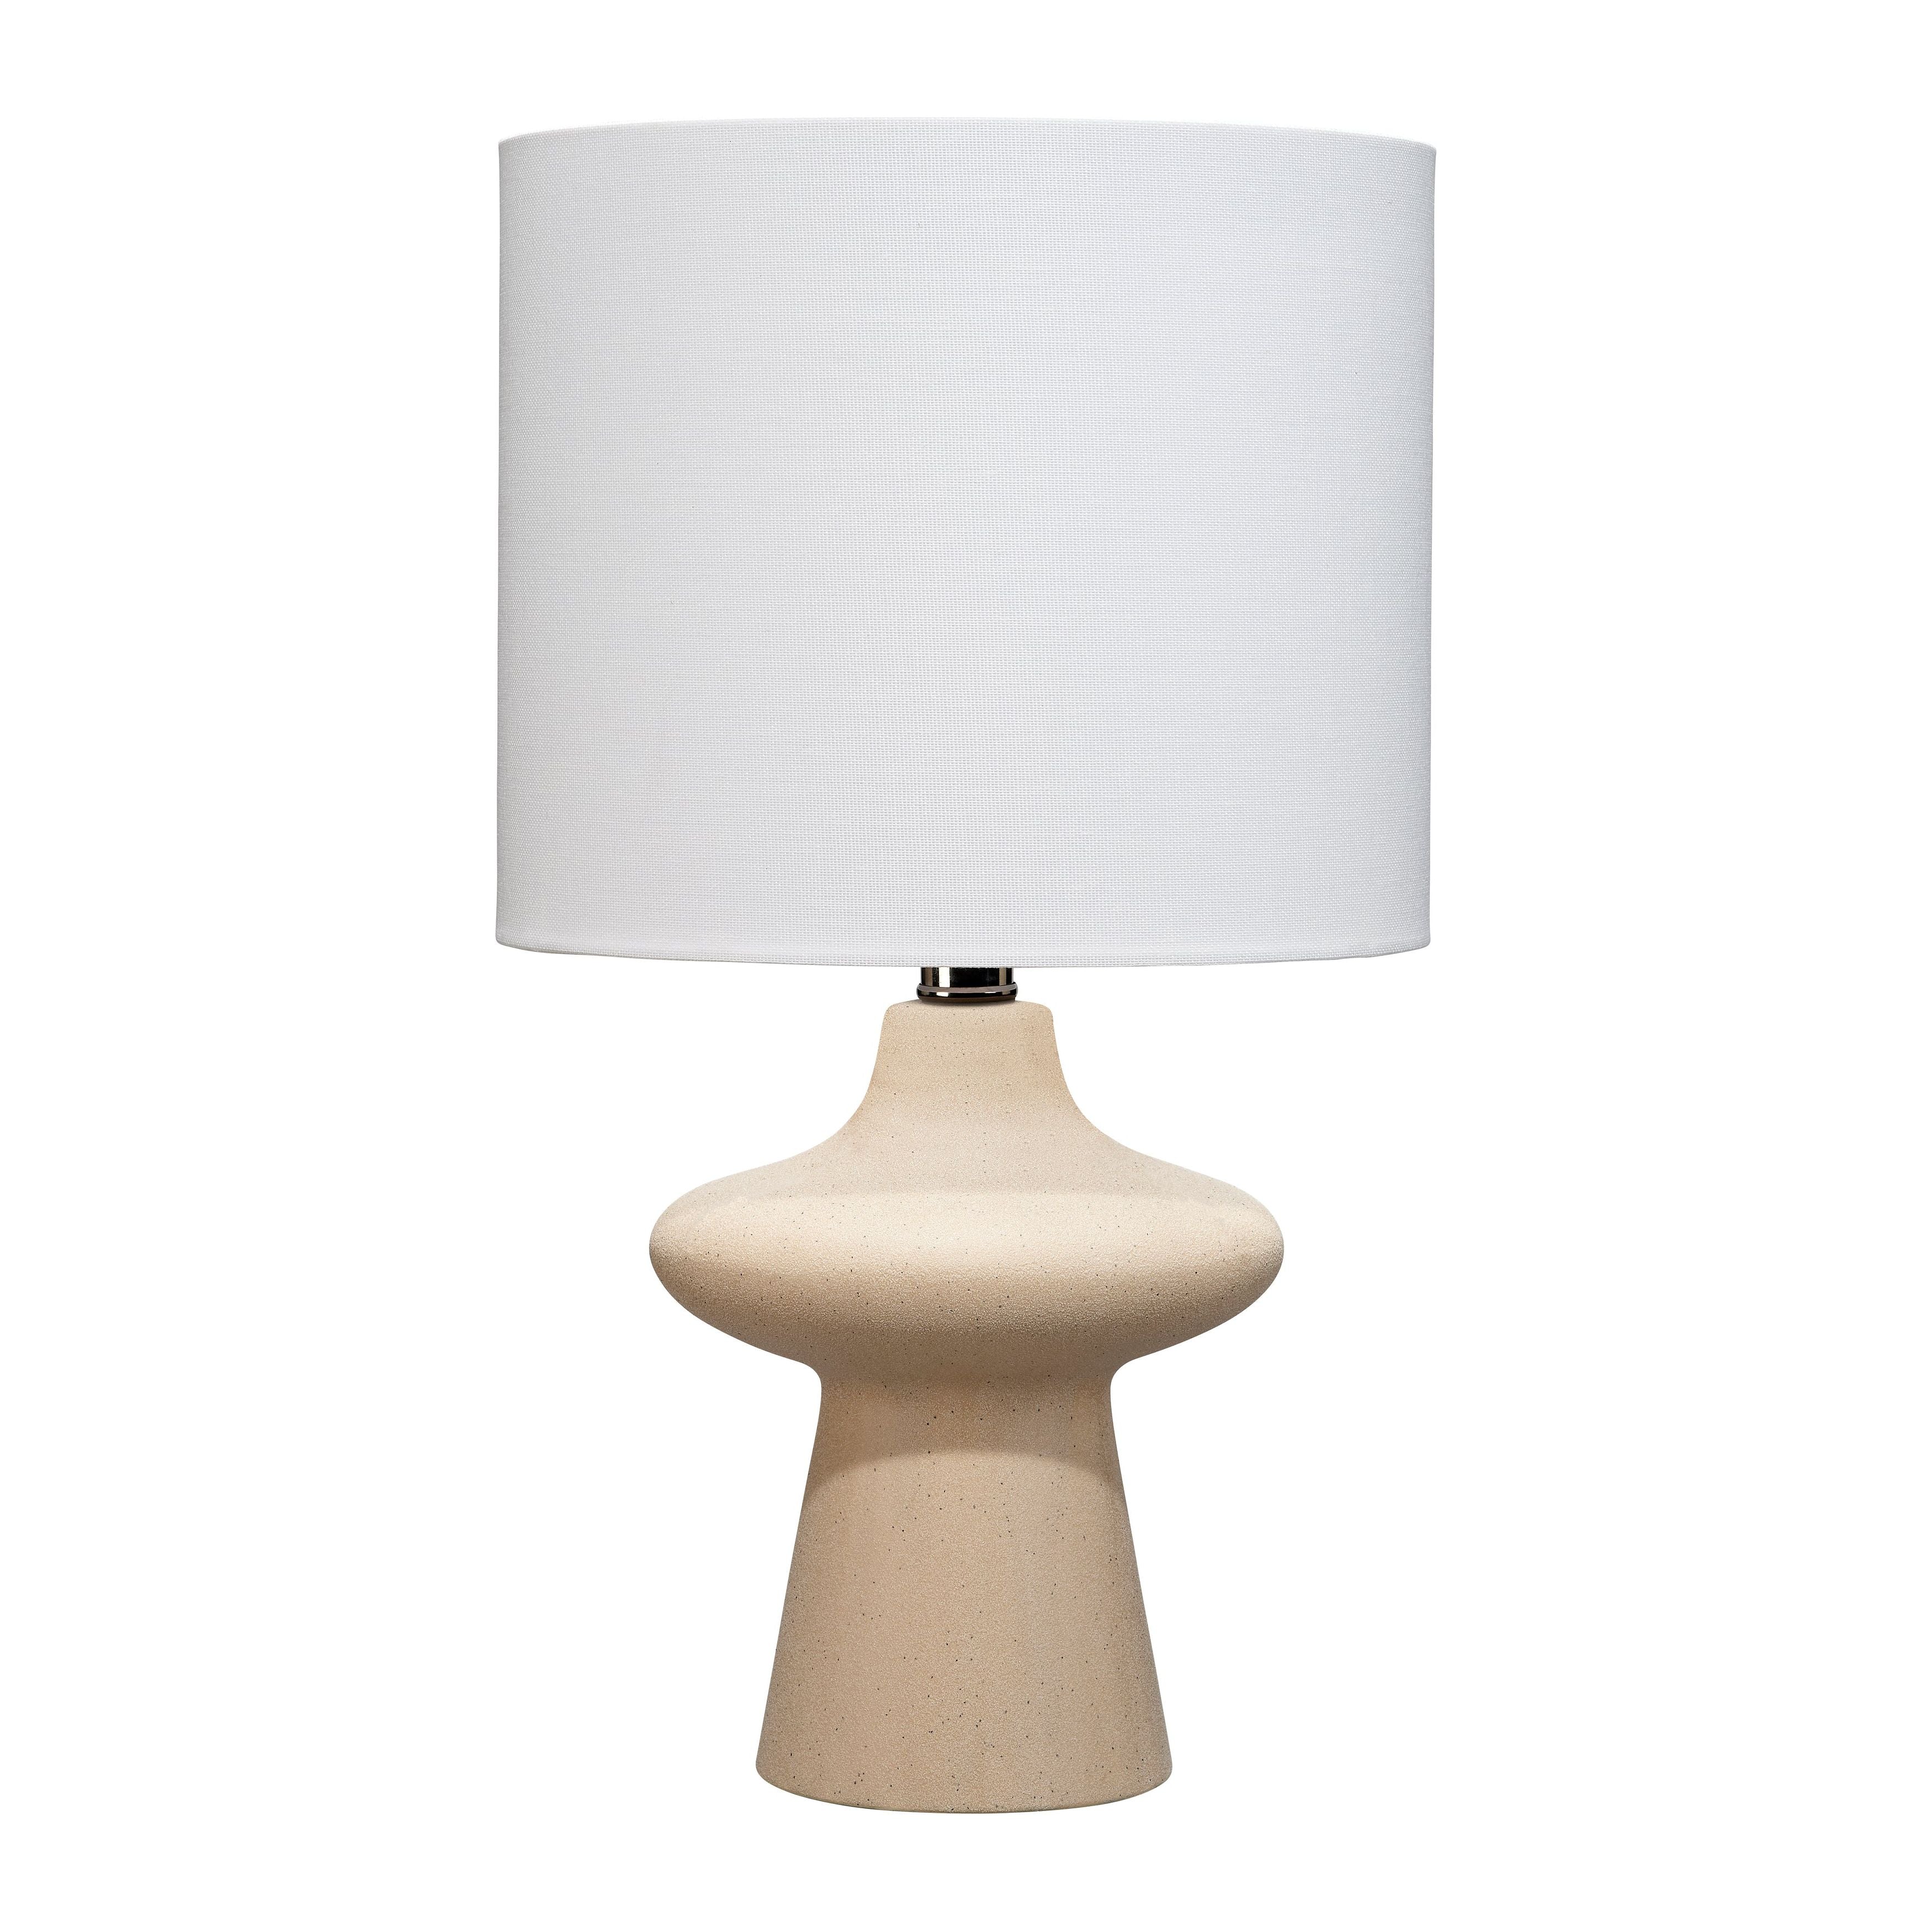 Jamie Young Company - LS9OLIVERBE -  Oliver Table Lamp -  - Beige 
